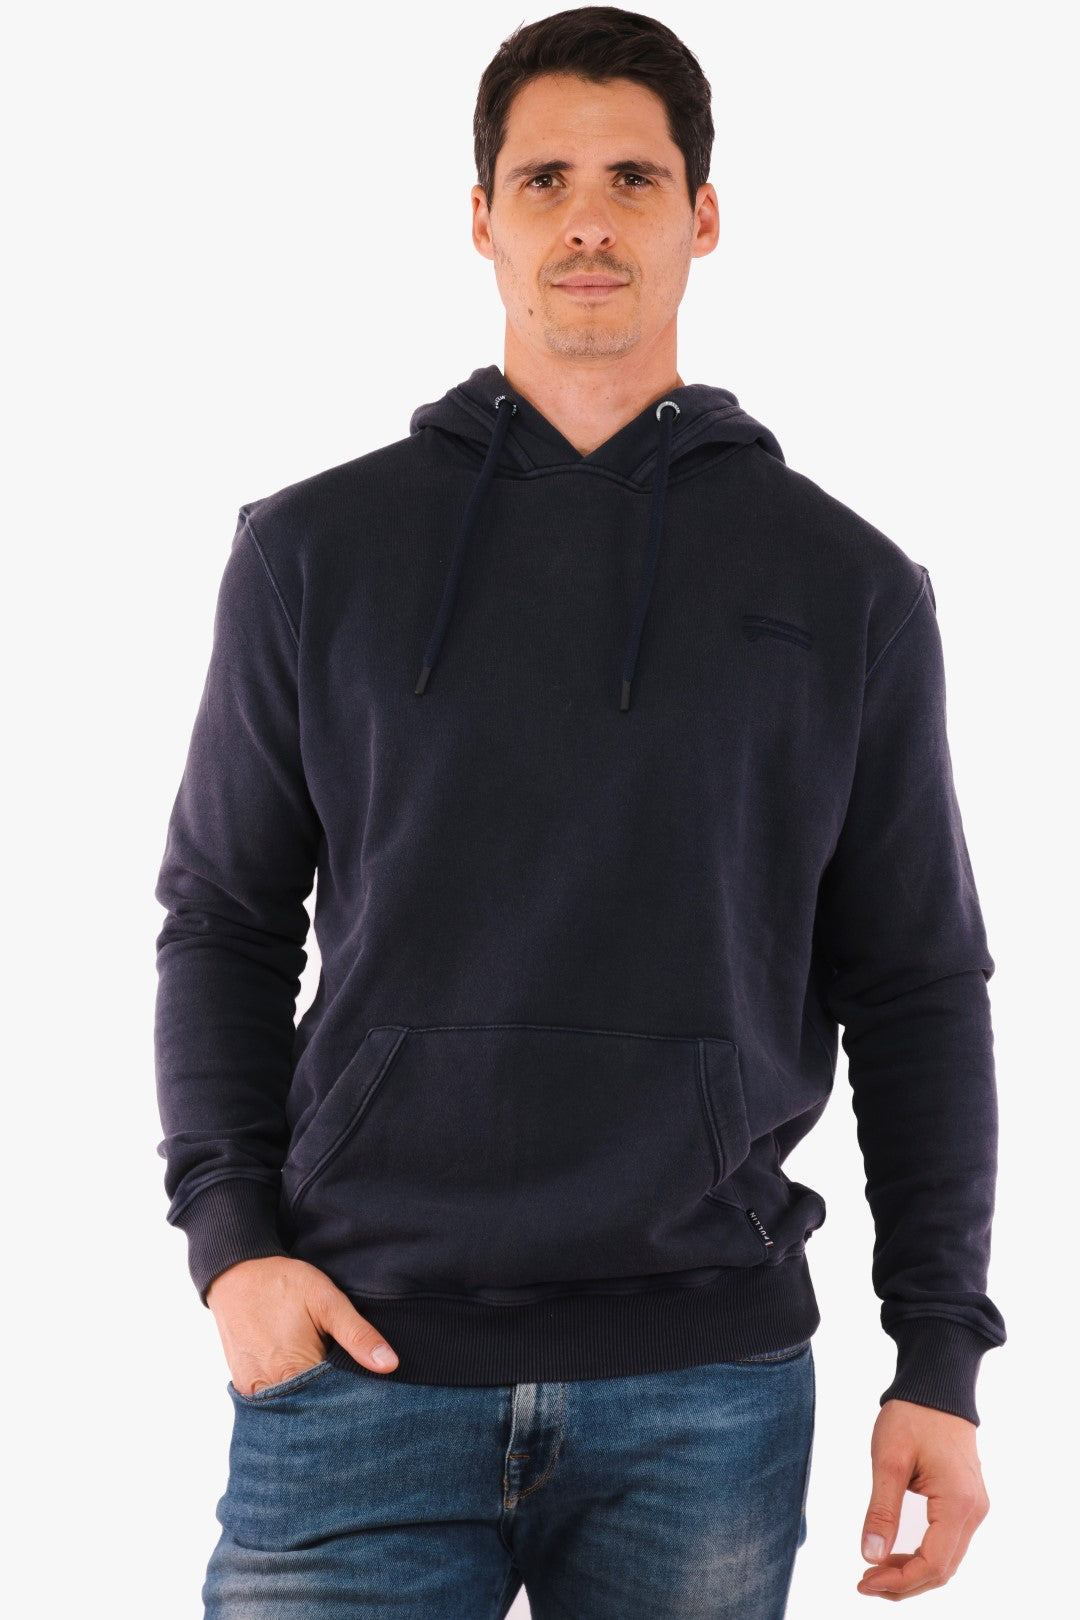 Pullin Hooded Sweater in Navy color